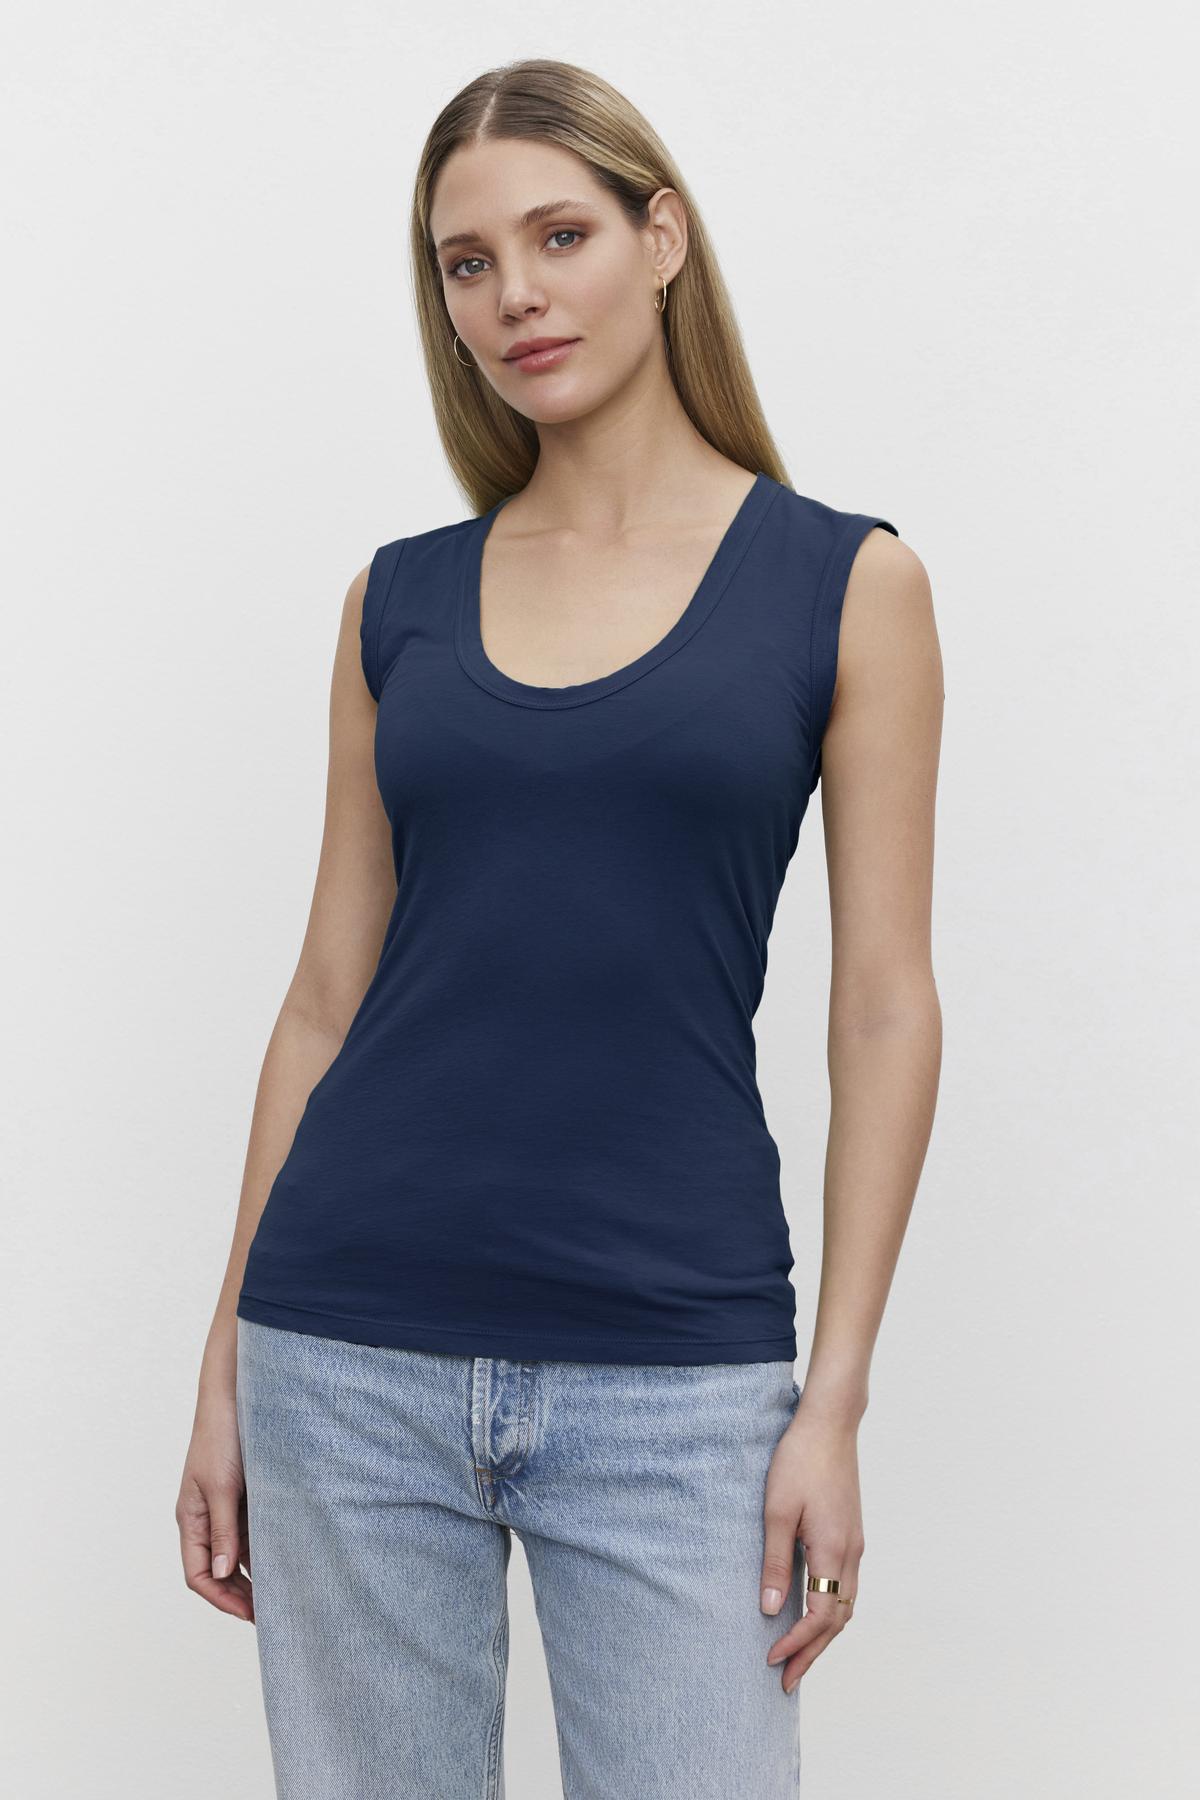 A woman with long hair is wearing a navy blue low-scoop-neck sleeveless Velvet by Graham & Spencer ESTINA TANK TOP and light blue jeans, standing against a plain white background.-36273869553857